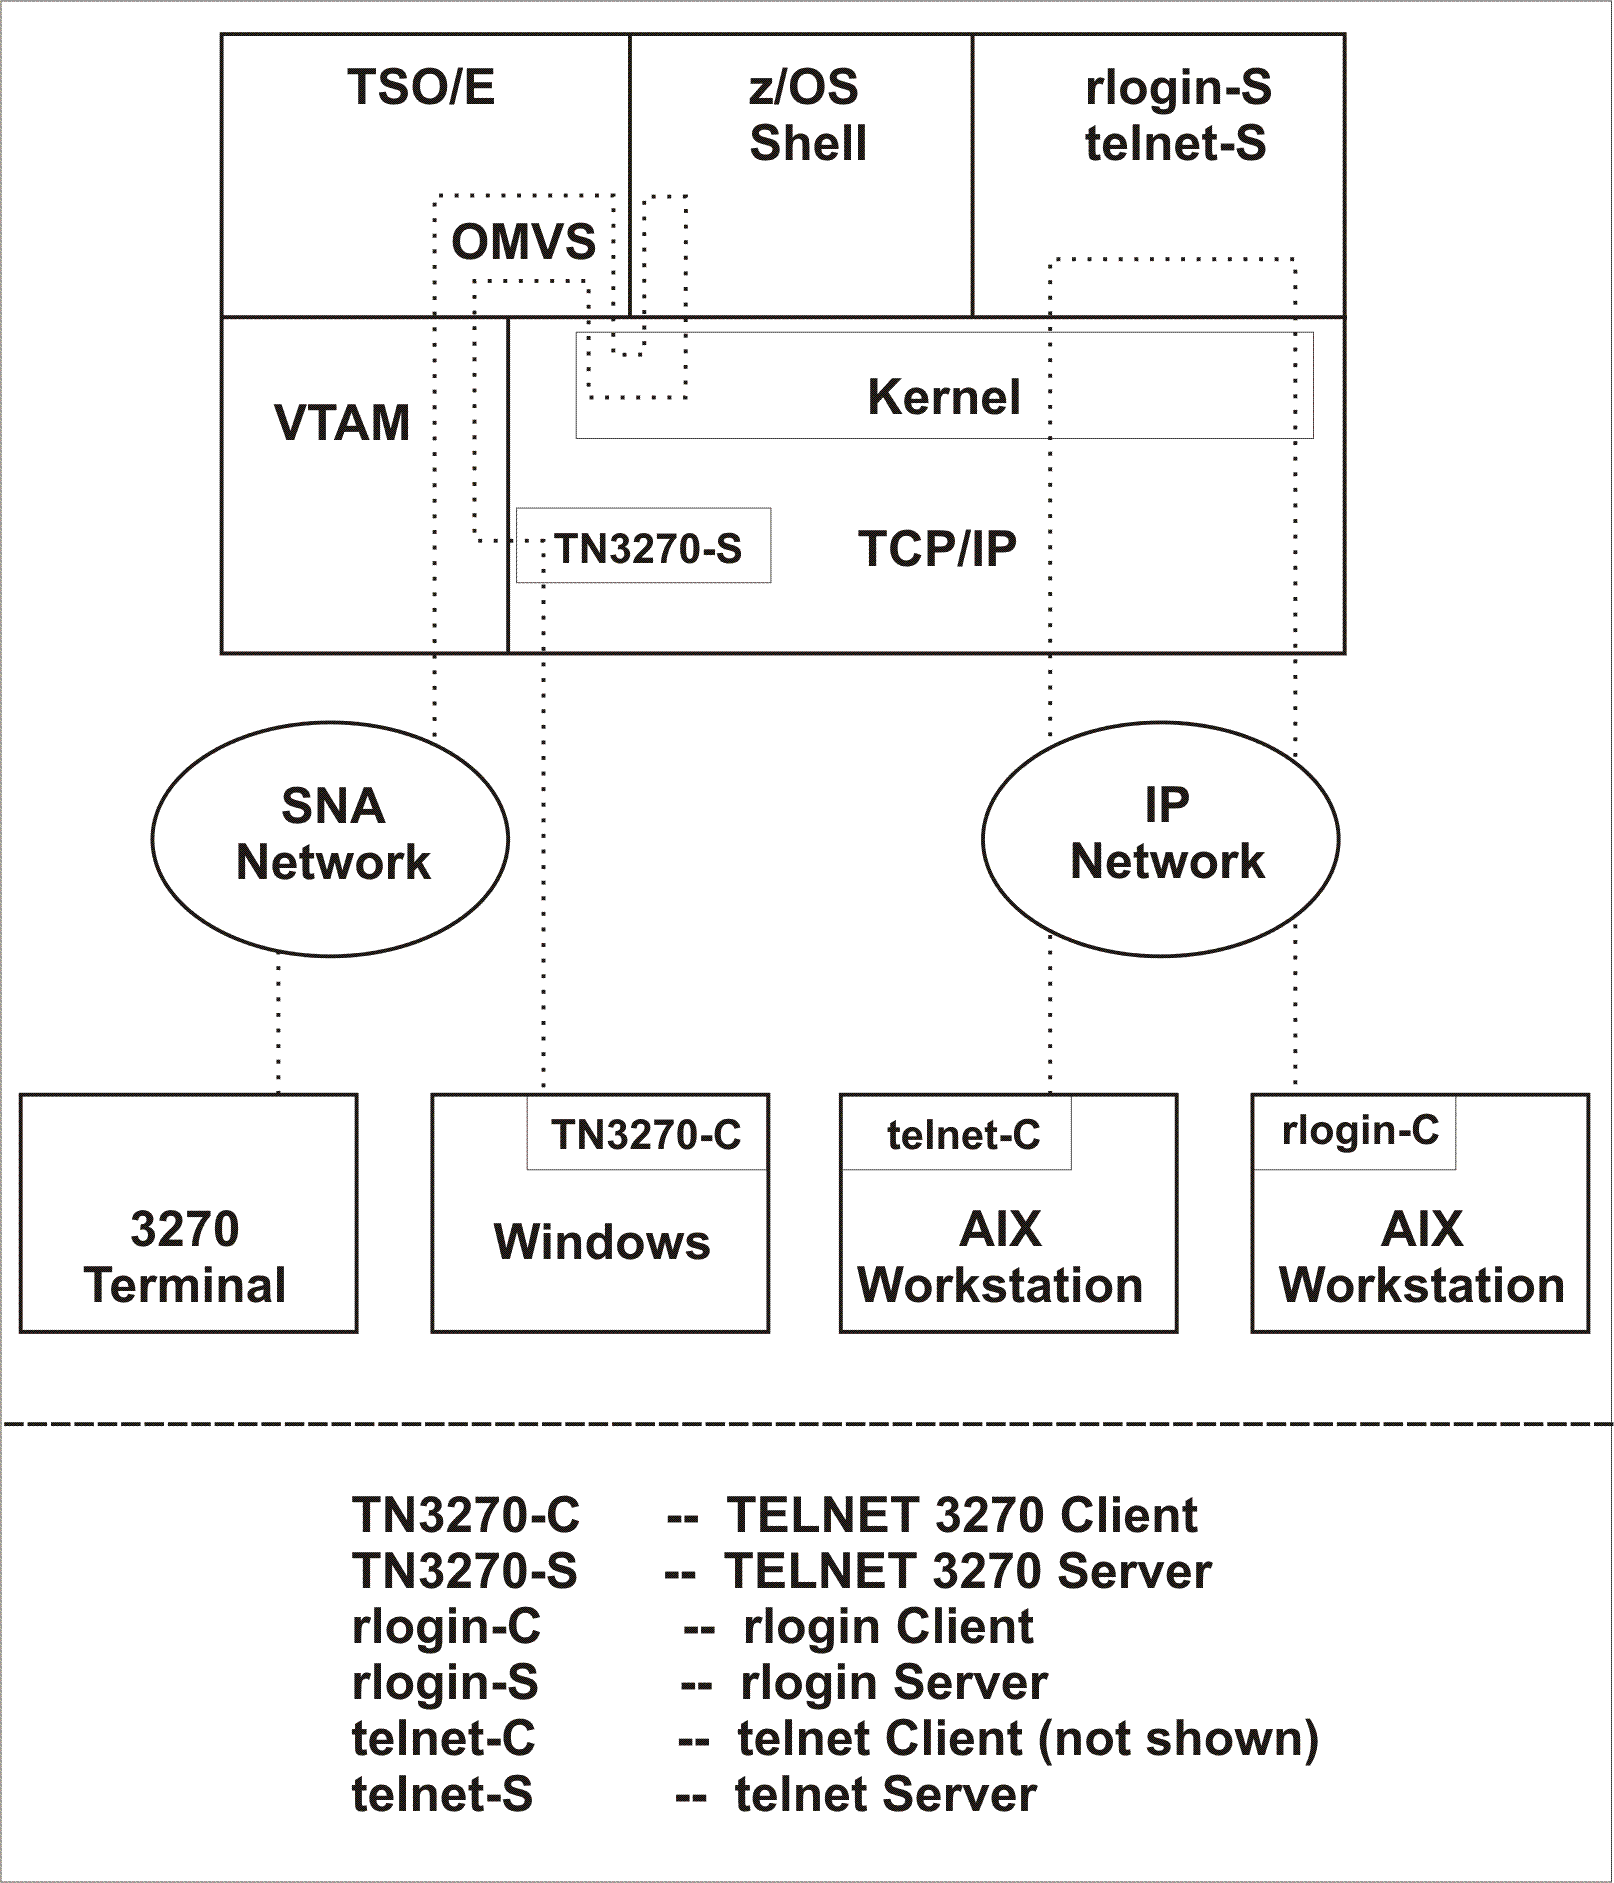 How workstations and networks connect to the z/OS system with kernel services